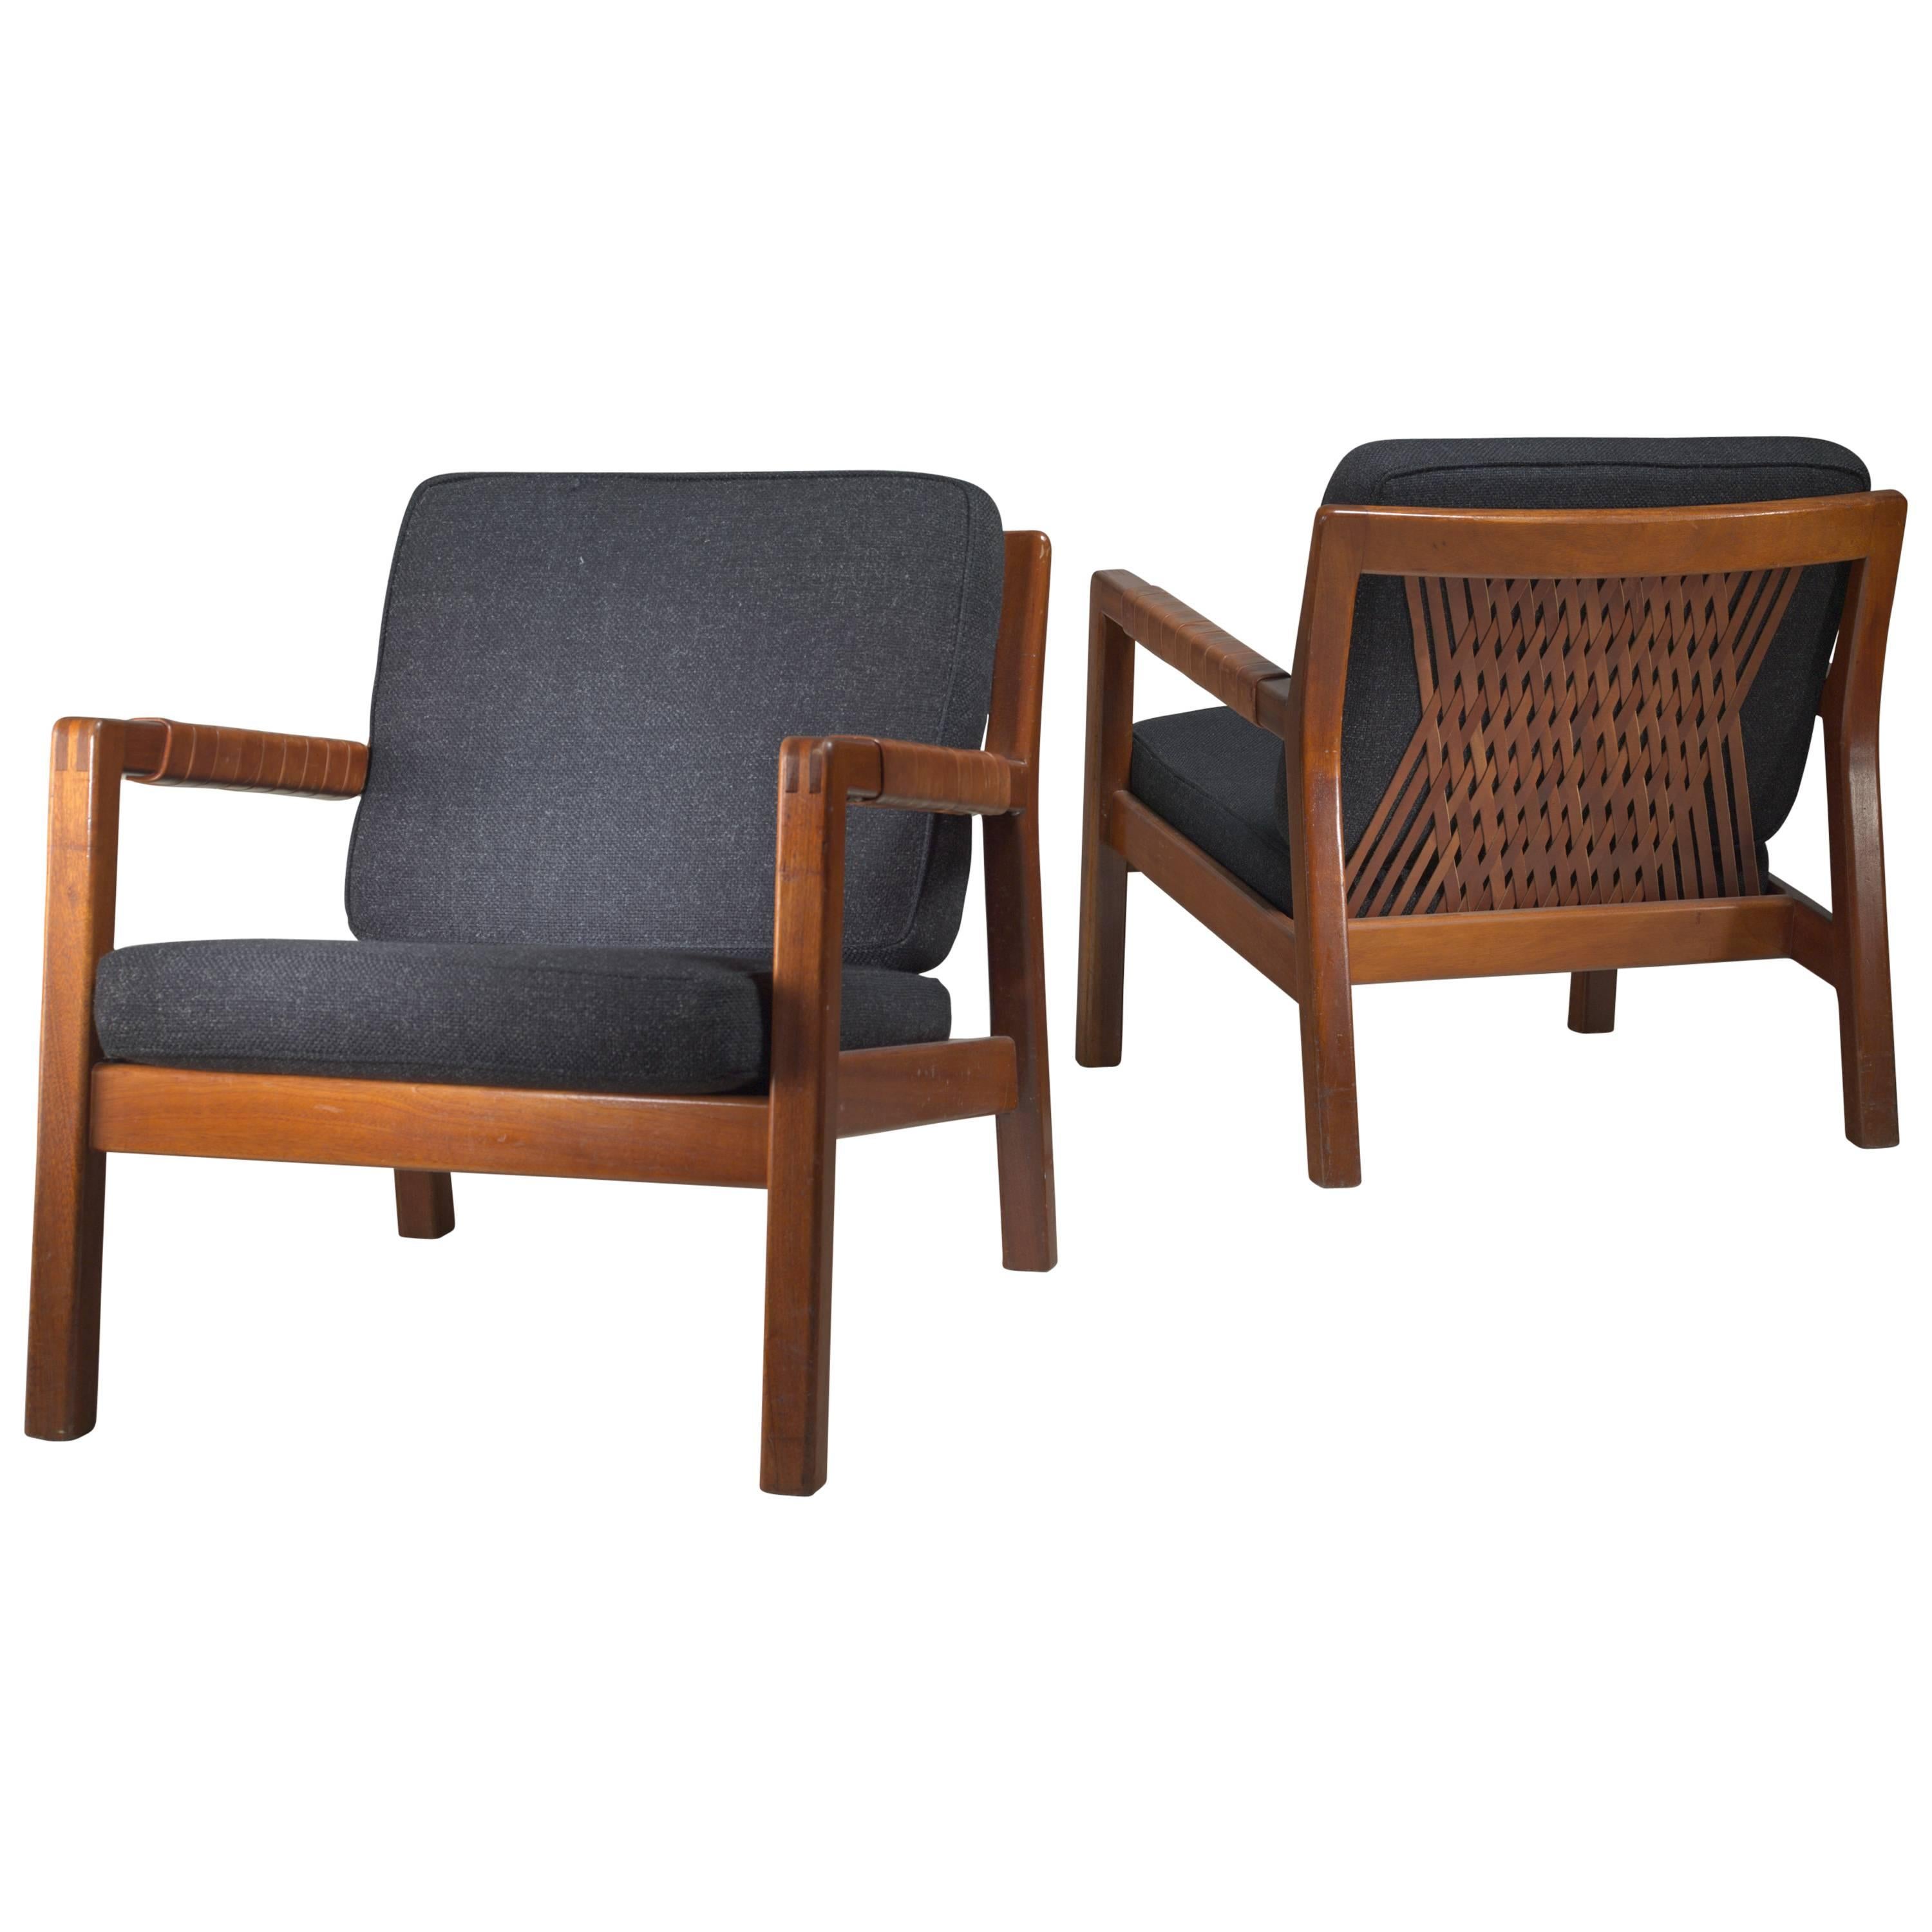 Carl Gustav Hiort af Ornäs Pair Oak and Leather Armchairs, Finland, 1950s For Sale